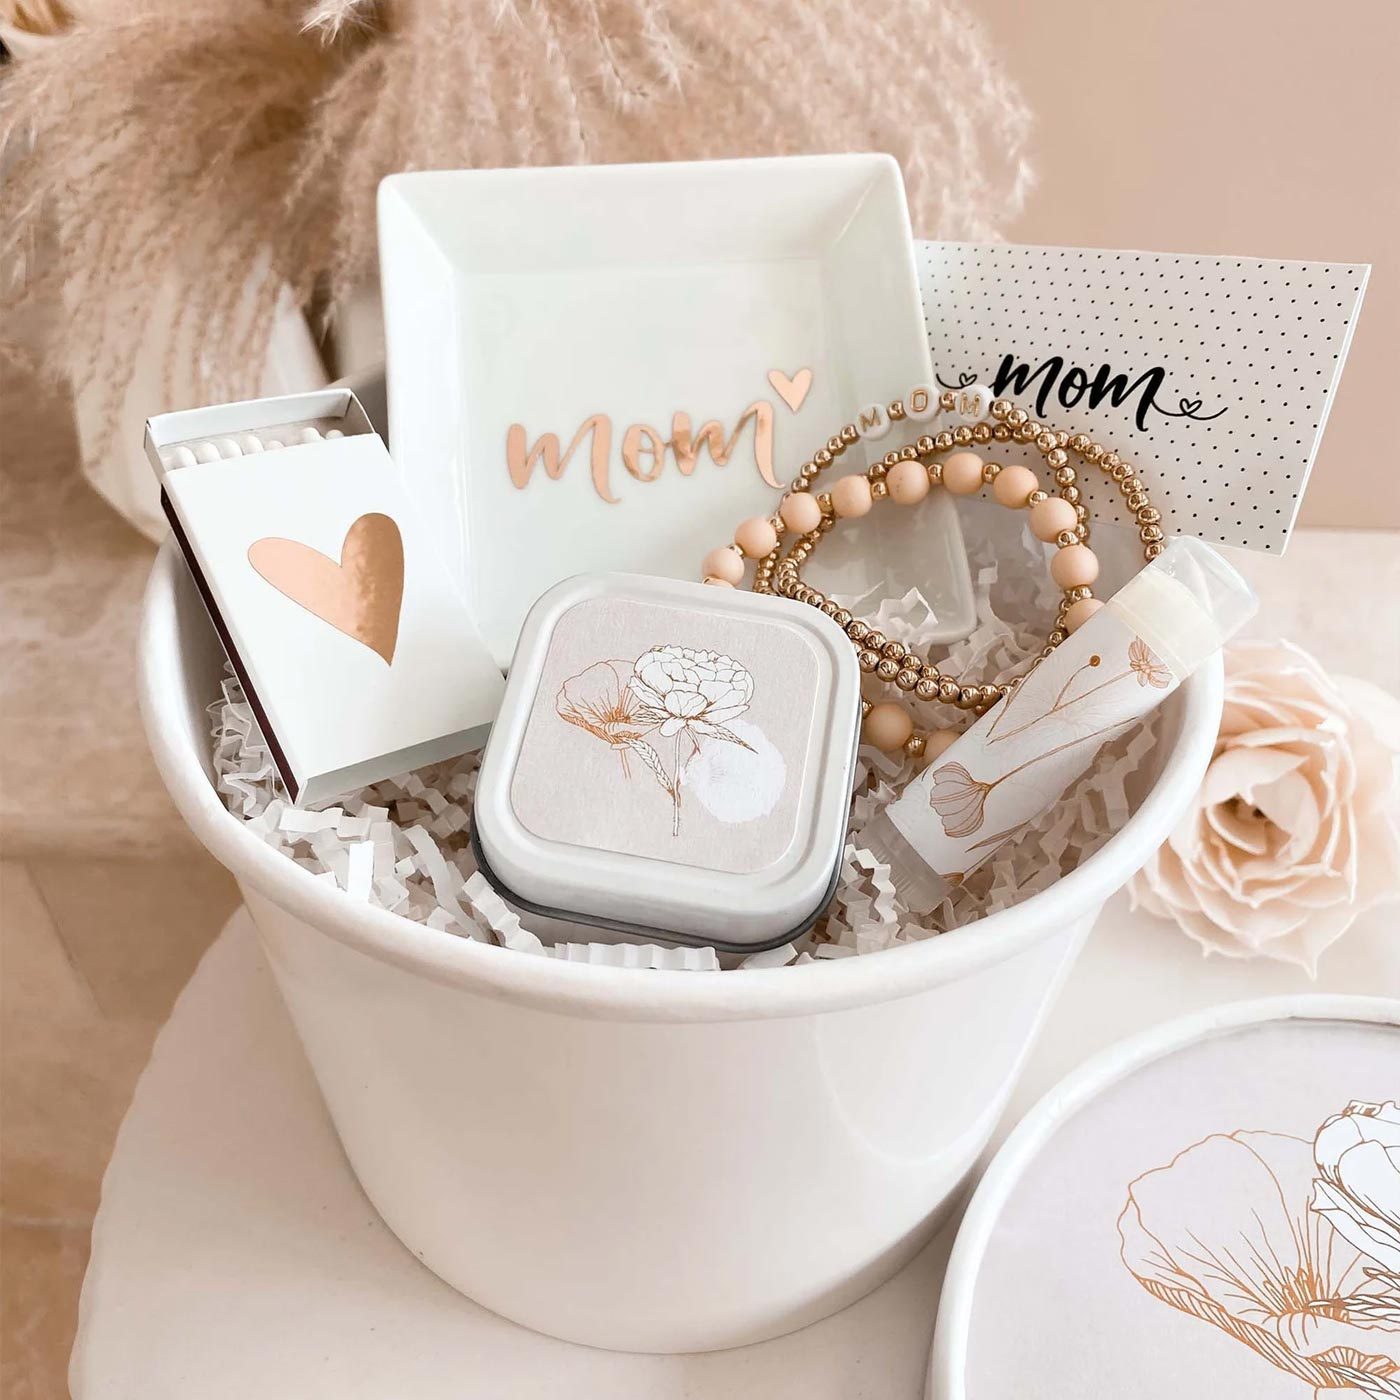 Mothers Day Gifts for Mom, Happy Birthday Gift Box, Spa Gift Set